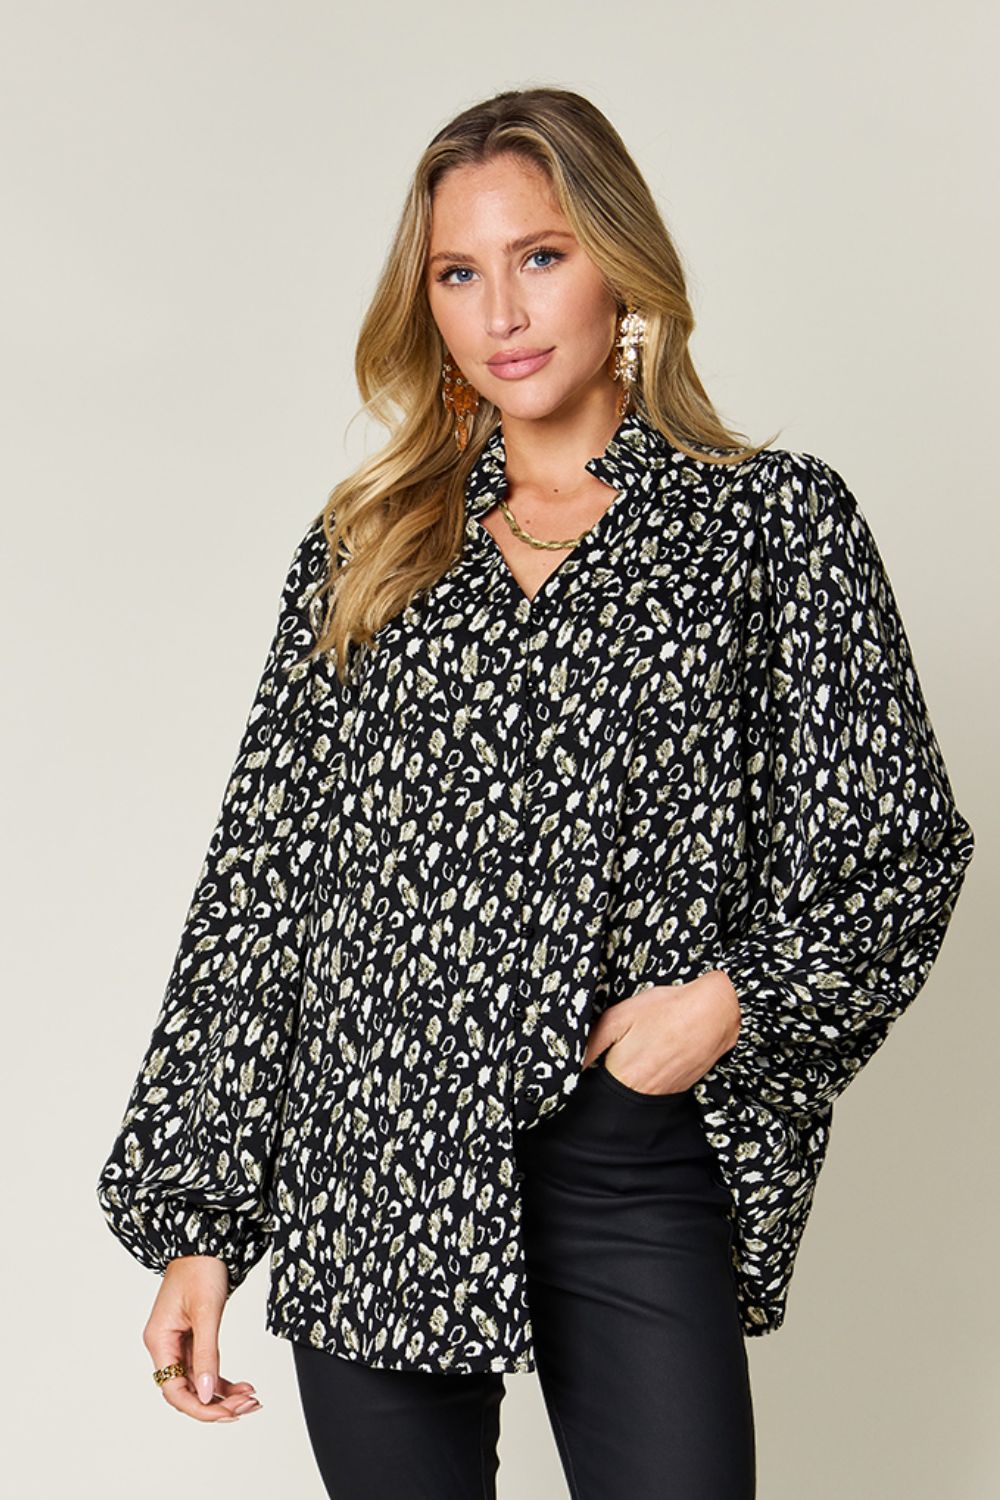 Double Take Full Size Leopard Long Sleeve Blouse - A stylish leopard-print blouse with long sleeves, perfect for adding a touch of bold sophistication to your wardrobe.